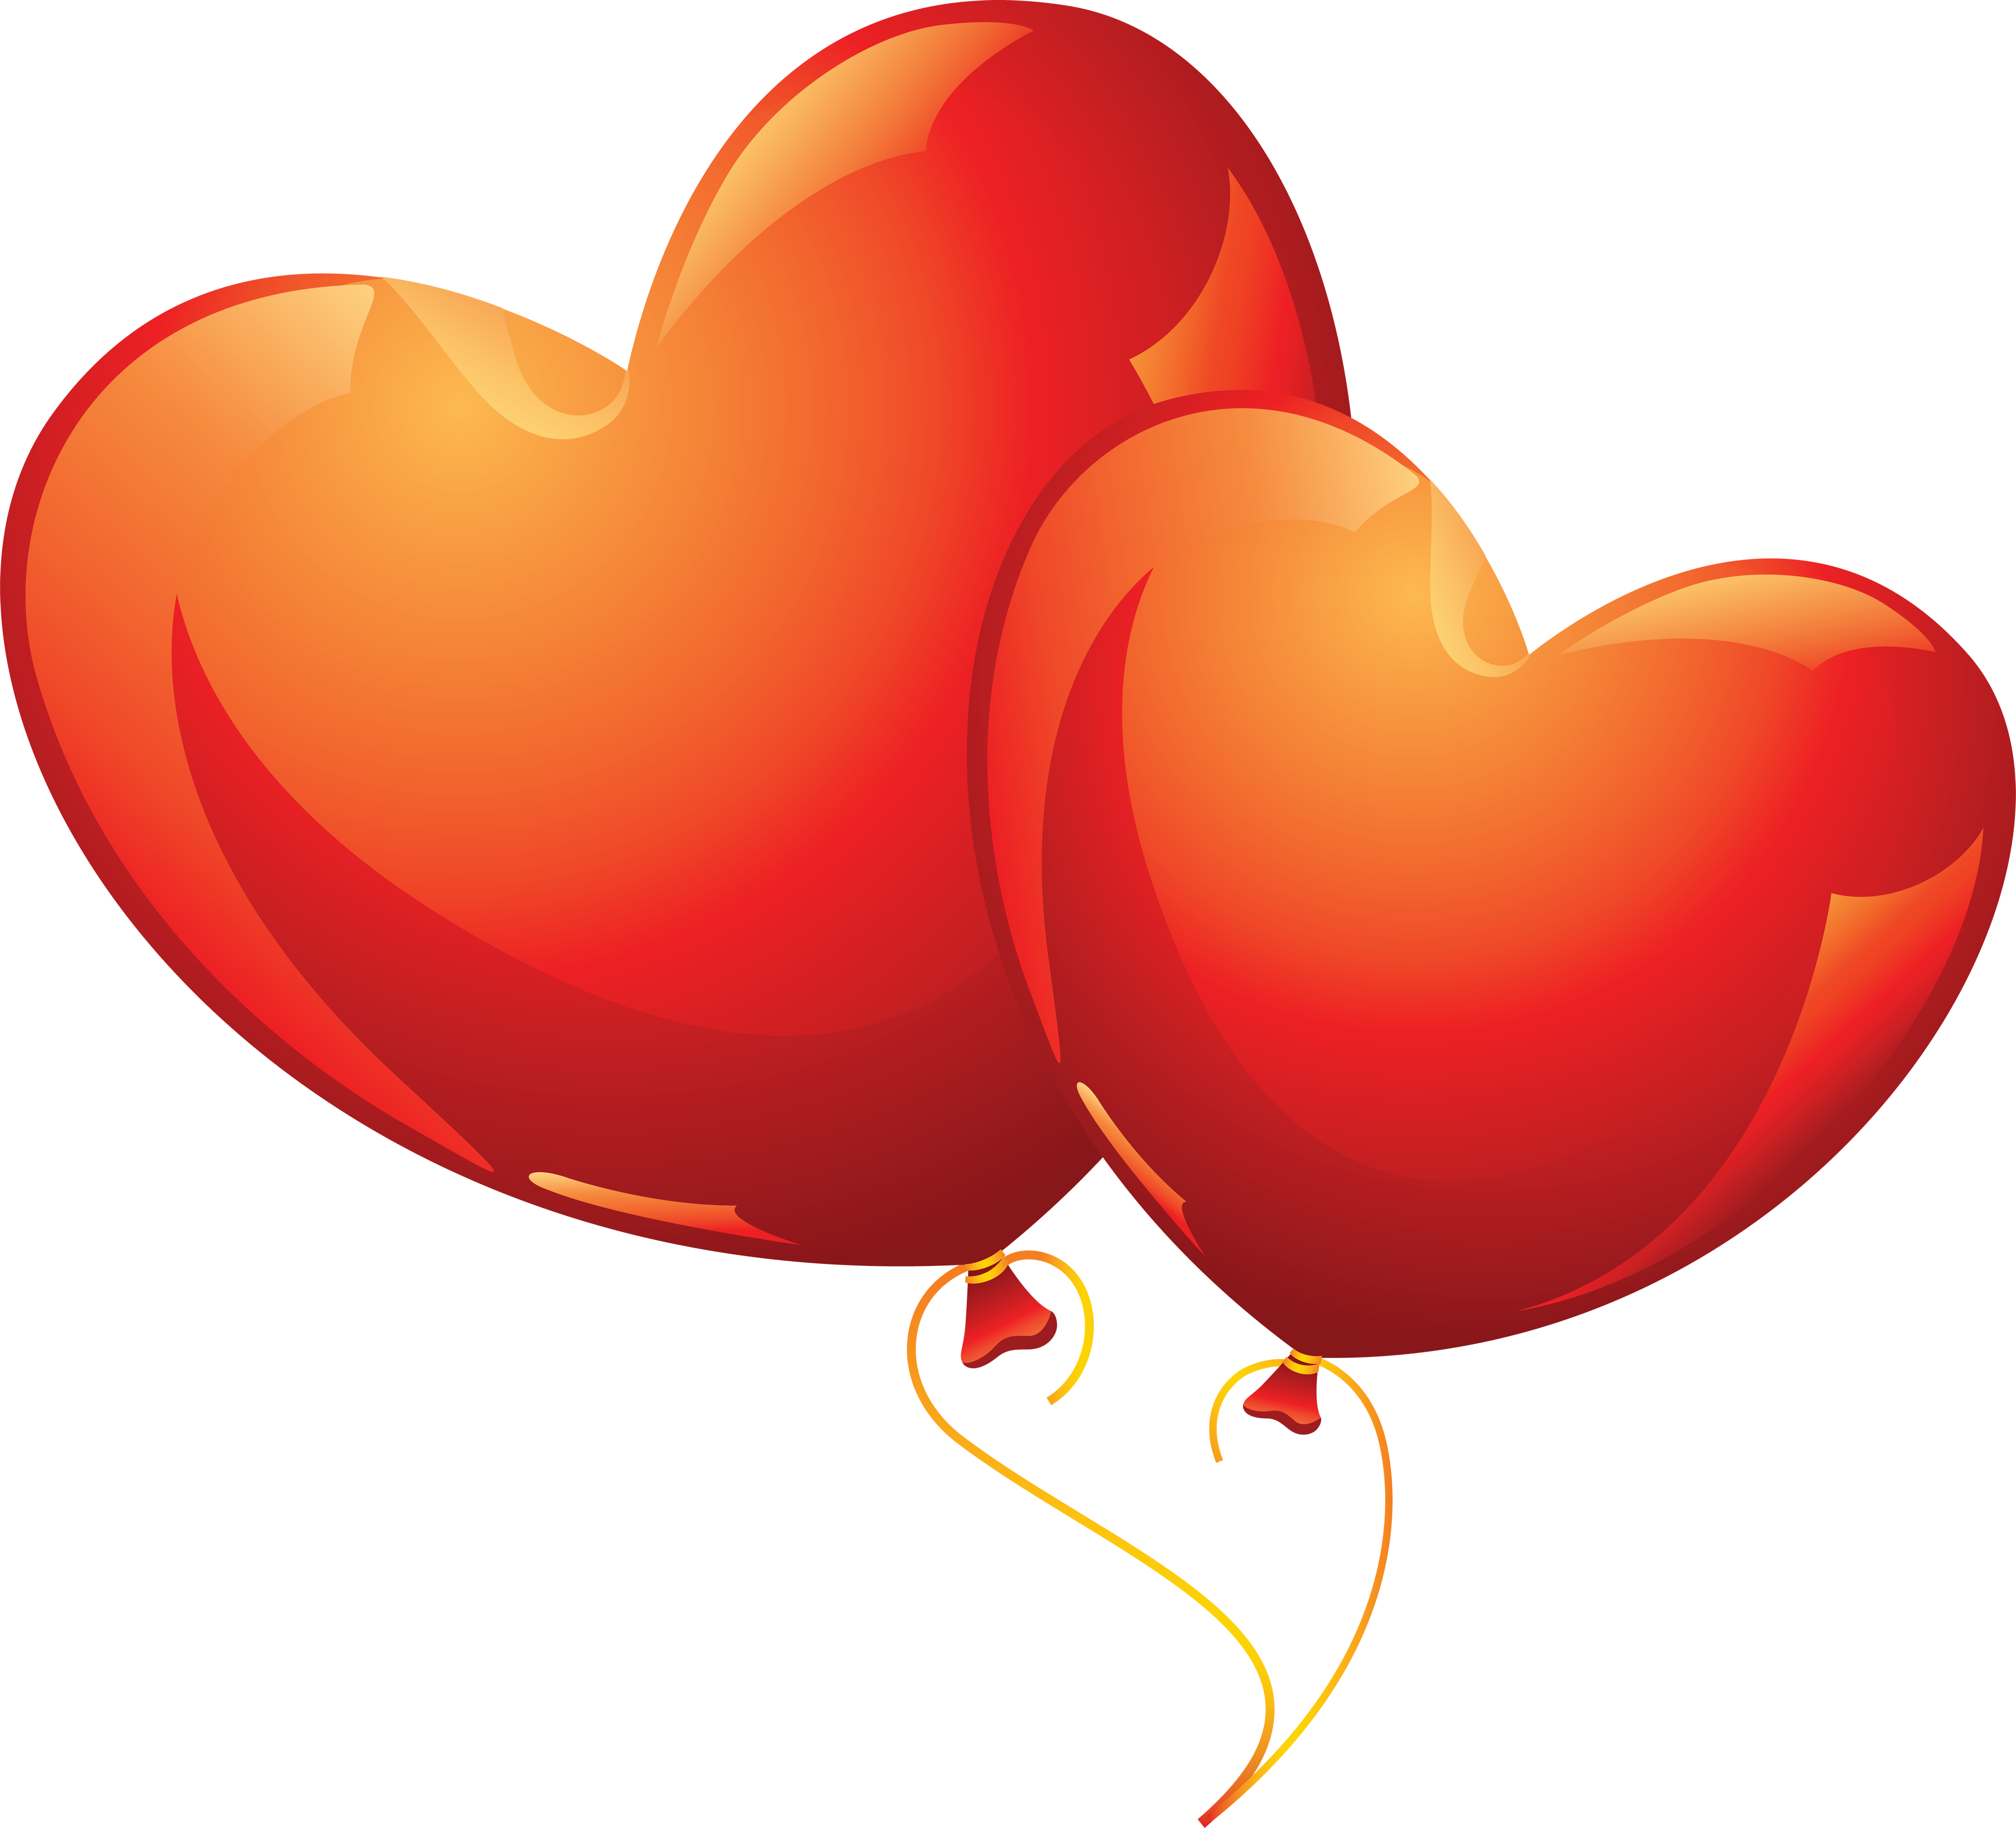 Heart PNG image, free download transparent image download, size: 3809x3454px